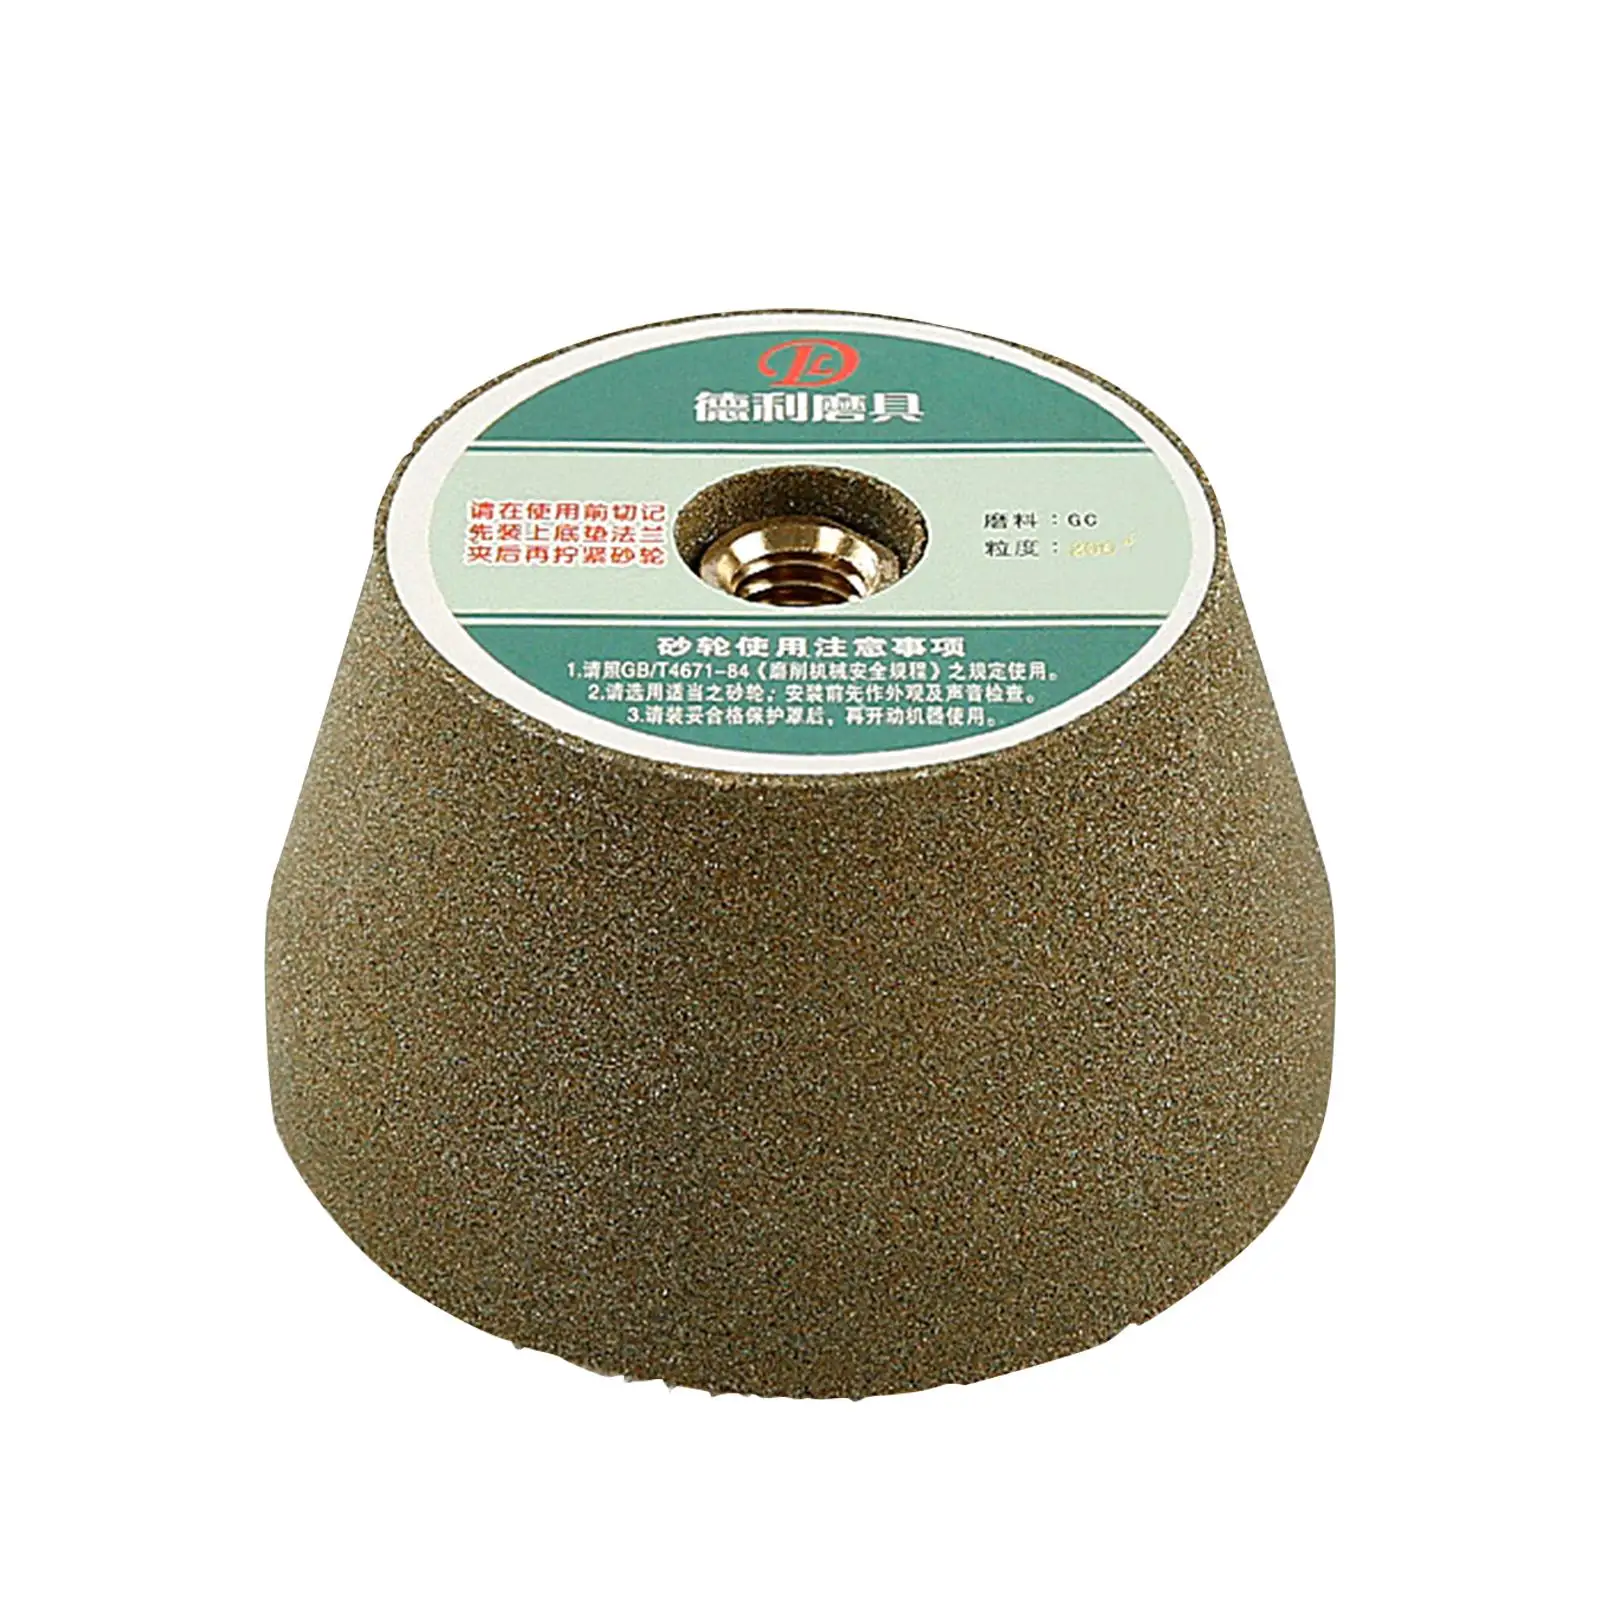 Grinding Wheel Dressing Tool Replacement Part Flaring Cup Wheel for M10 Angle Grinder Shaping Granite Bench Grinder Concrete